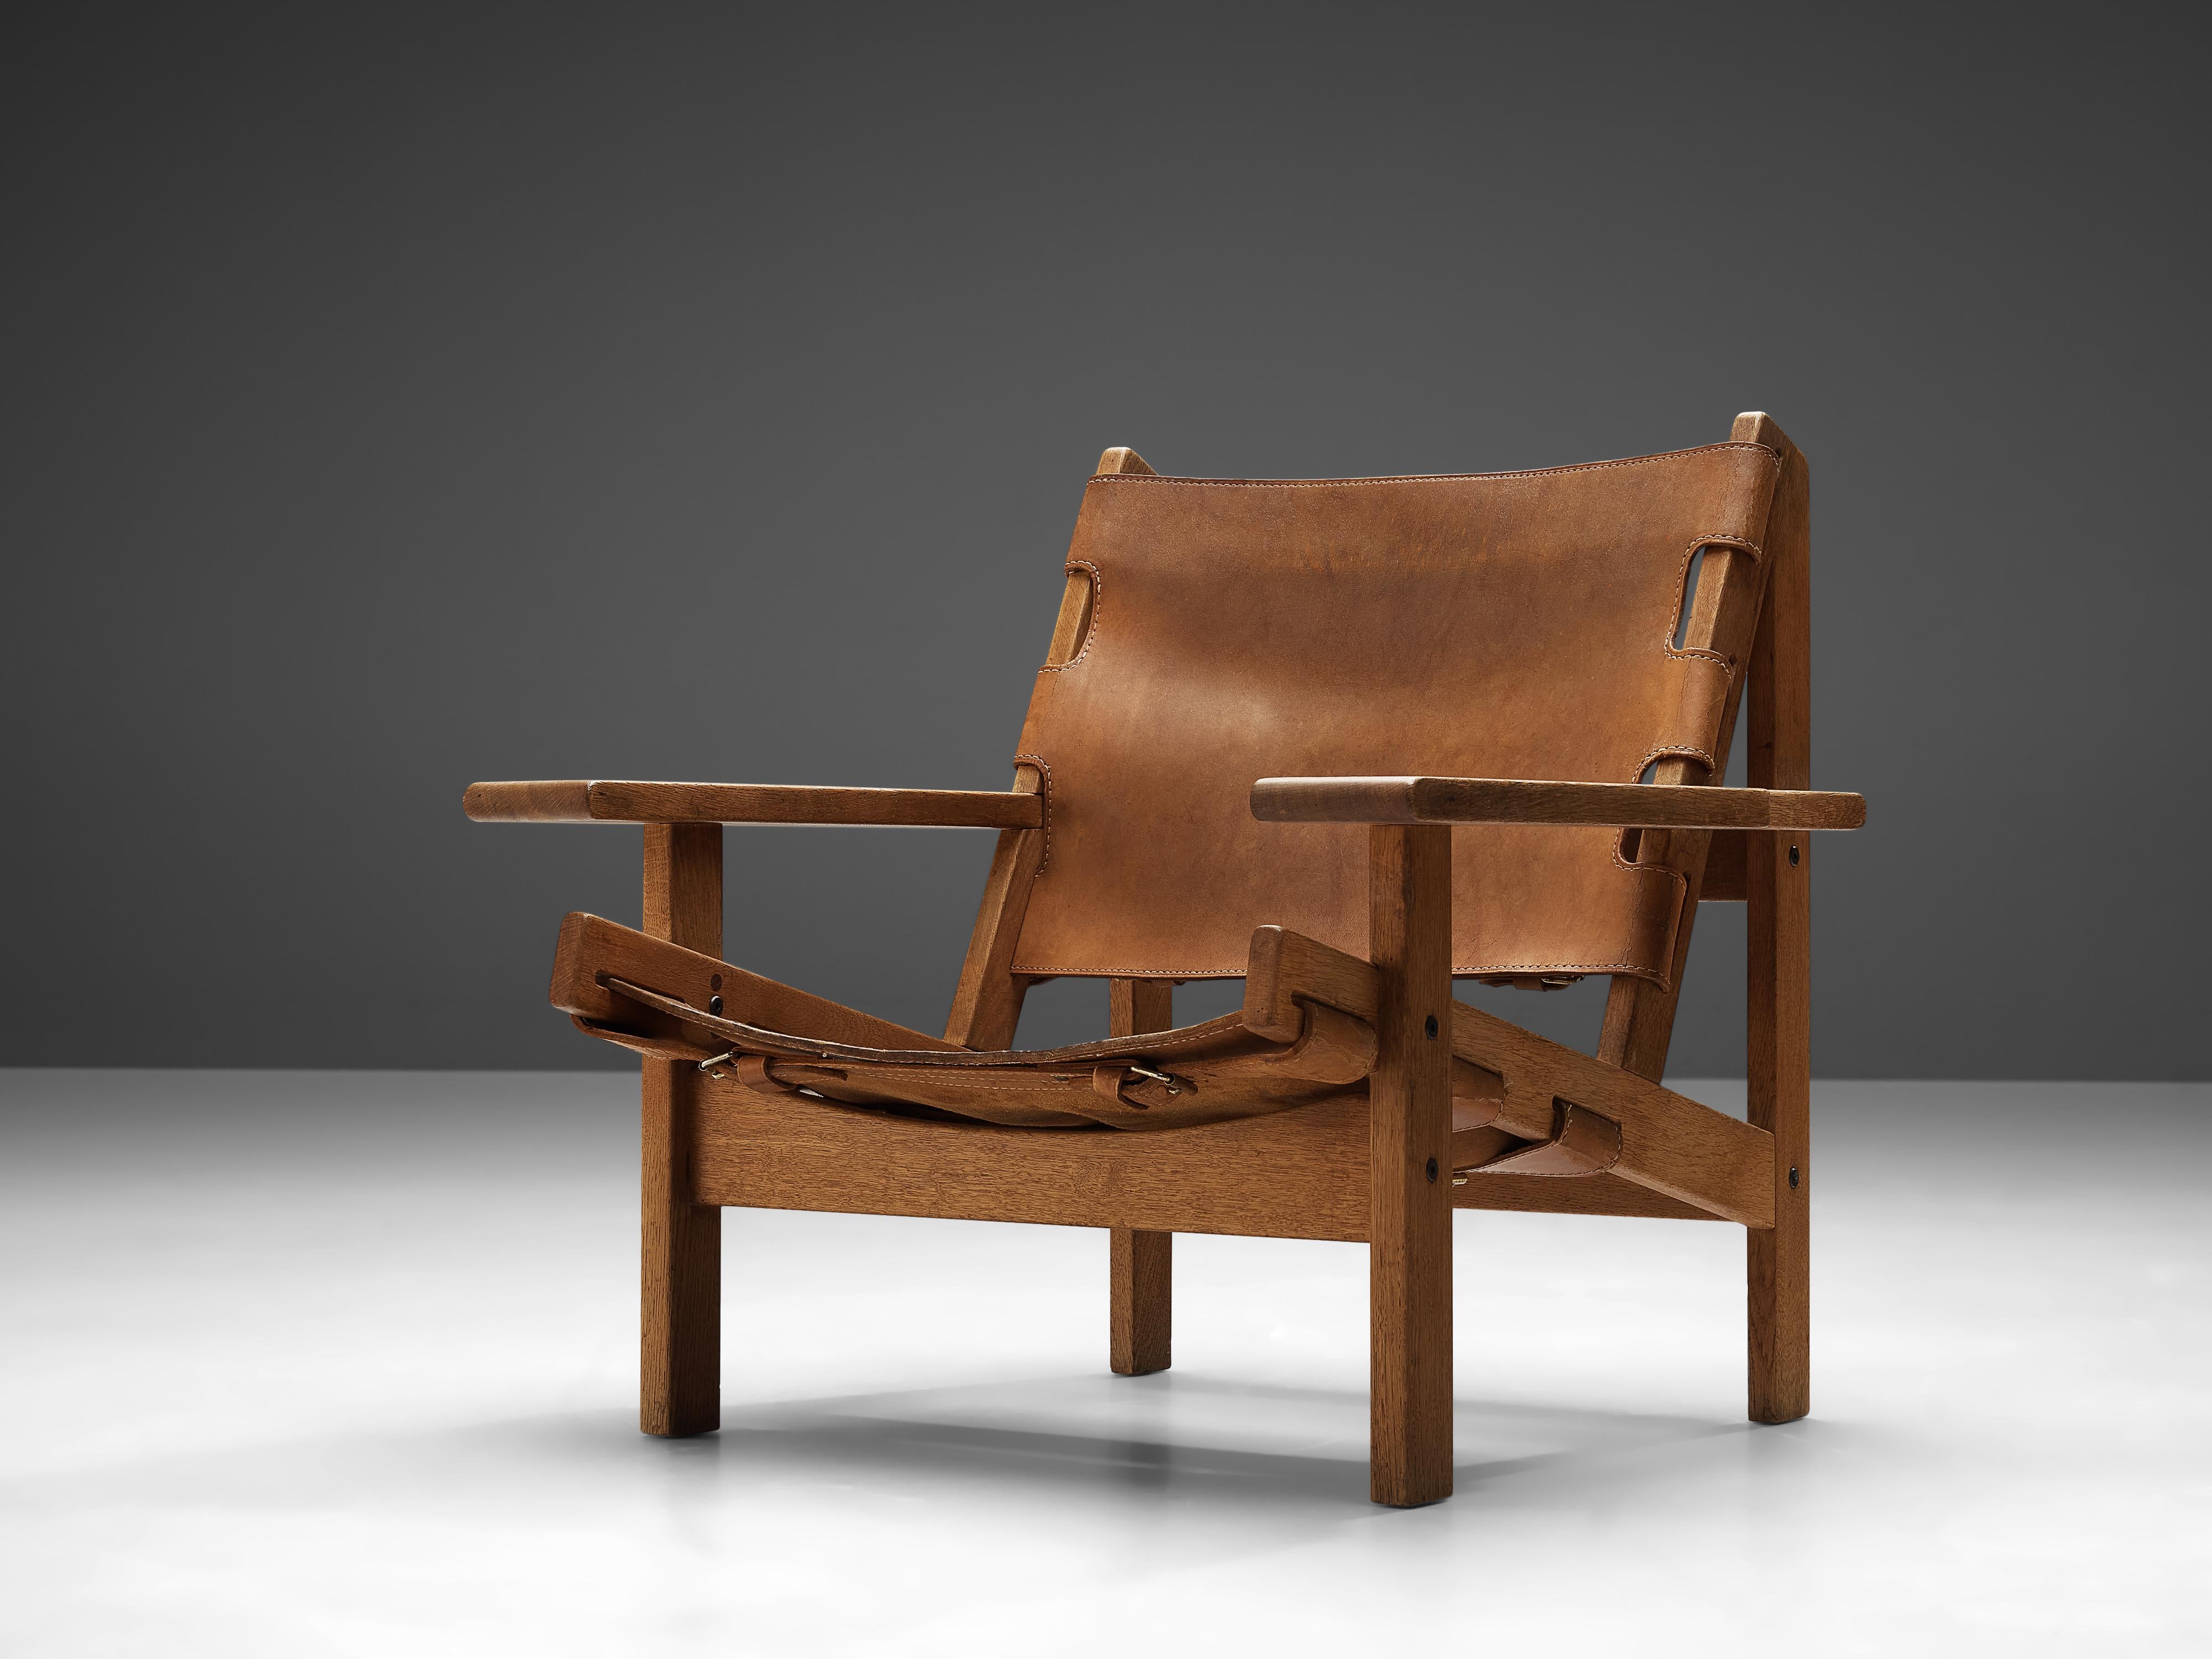 Erling Jessen, lounge chair model 168, solid oak, leather, Denmark, 1960.

This lounge chair shows exquisite Danish craftsmanship and aesthetics. It features traits of hunting thanks to its strong, sturdy character and the combination of the